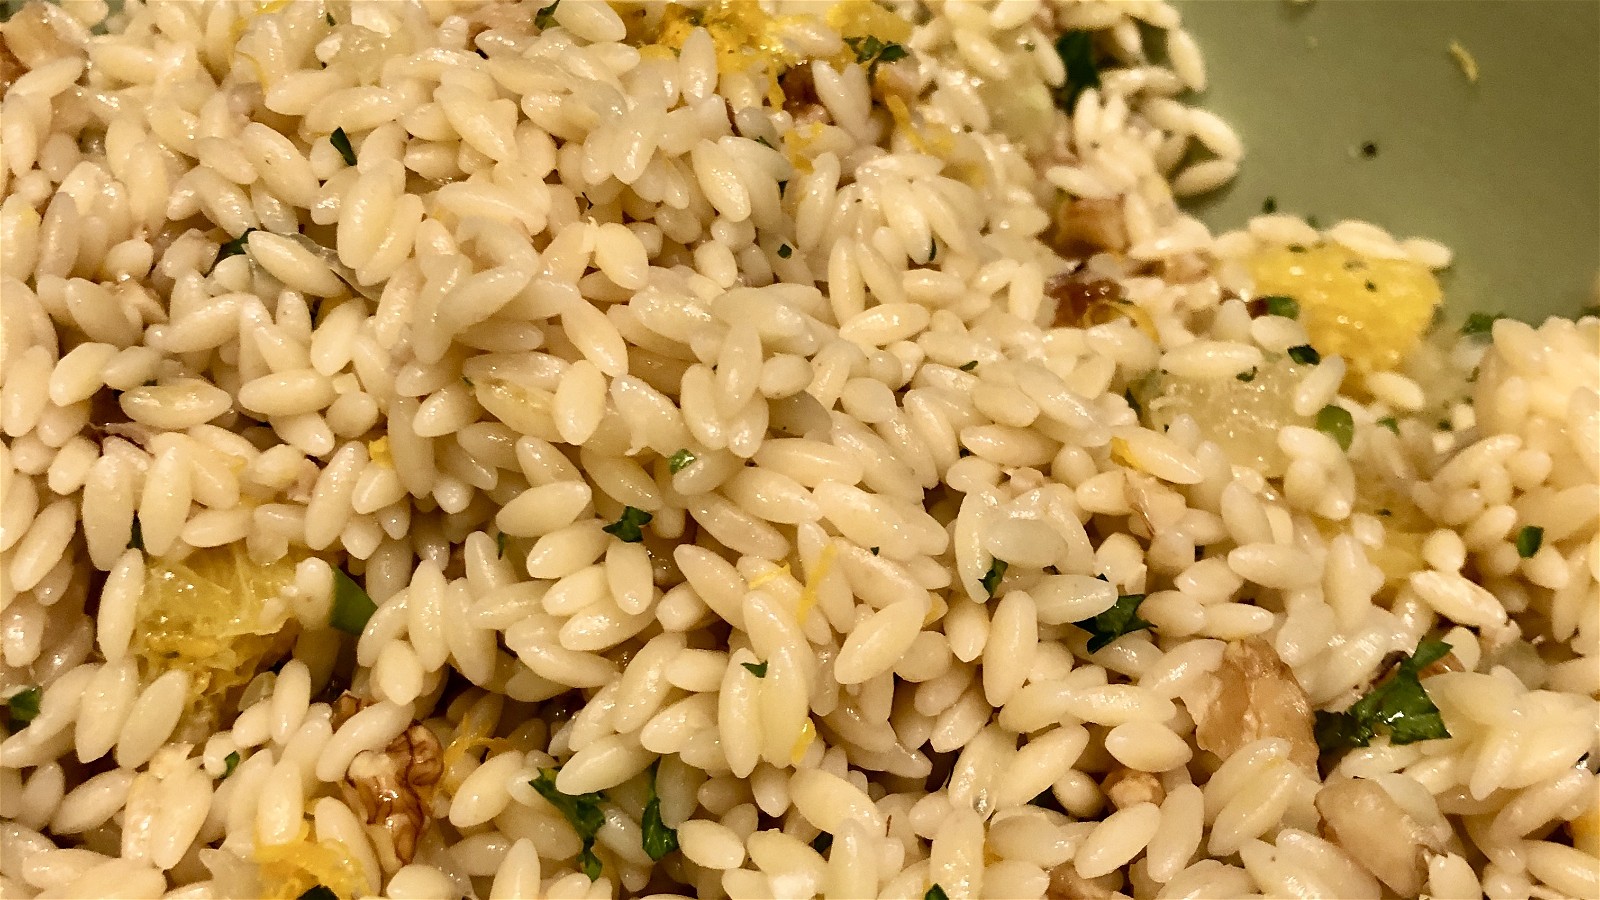 Image of Orzo with Walnuts and Citrus